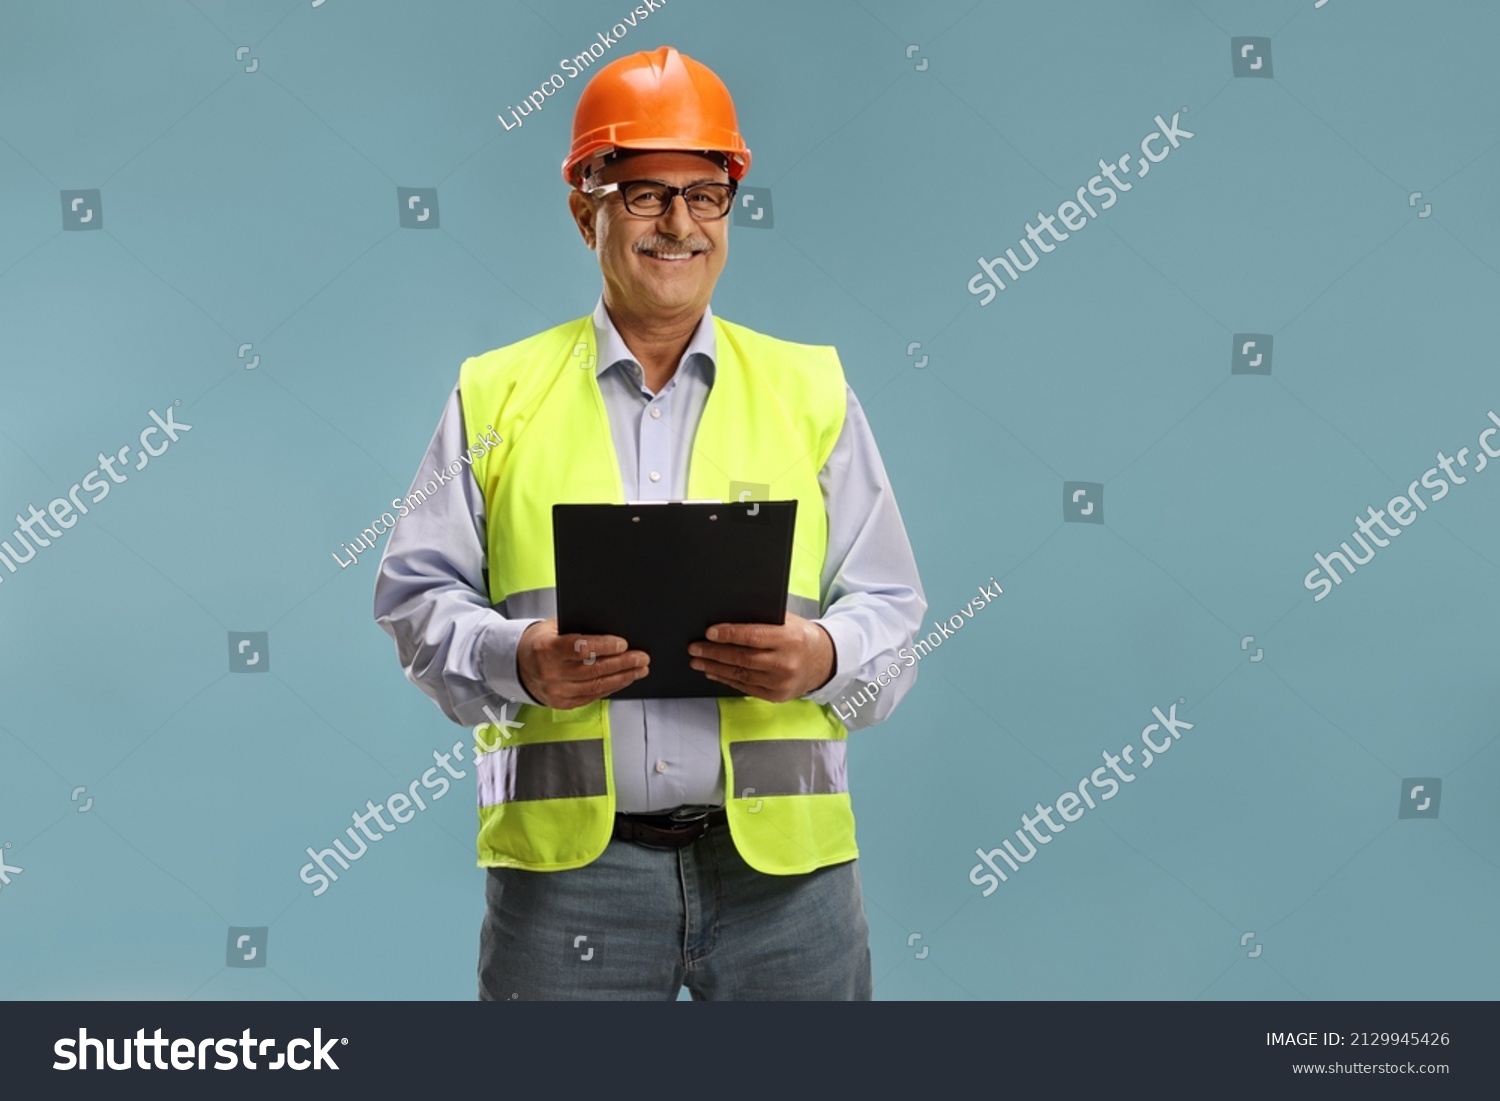 Construction site engineer with a reflective vest isolated over blue background #2129945426